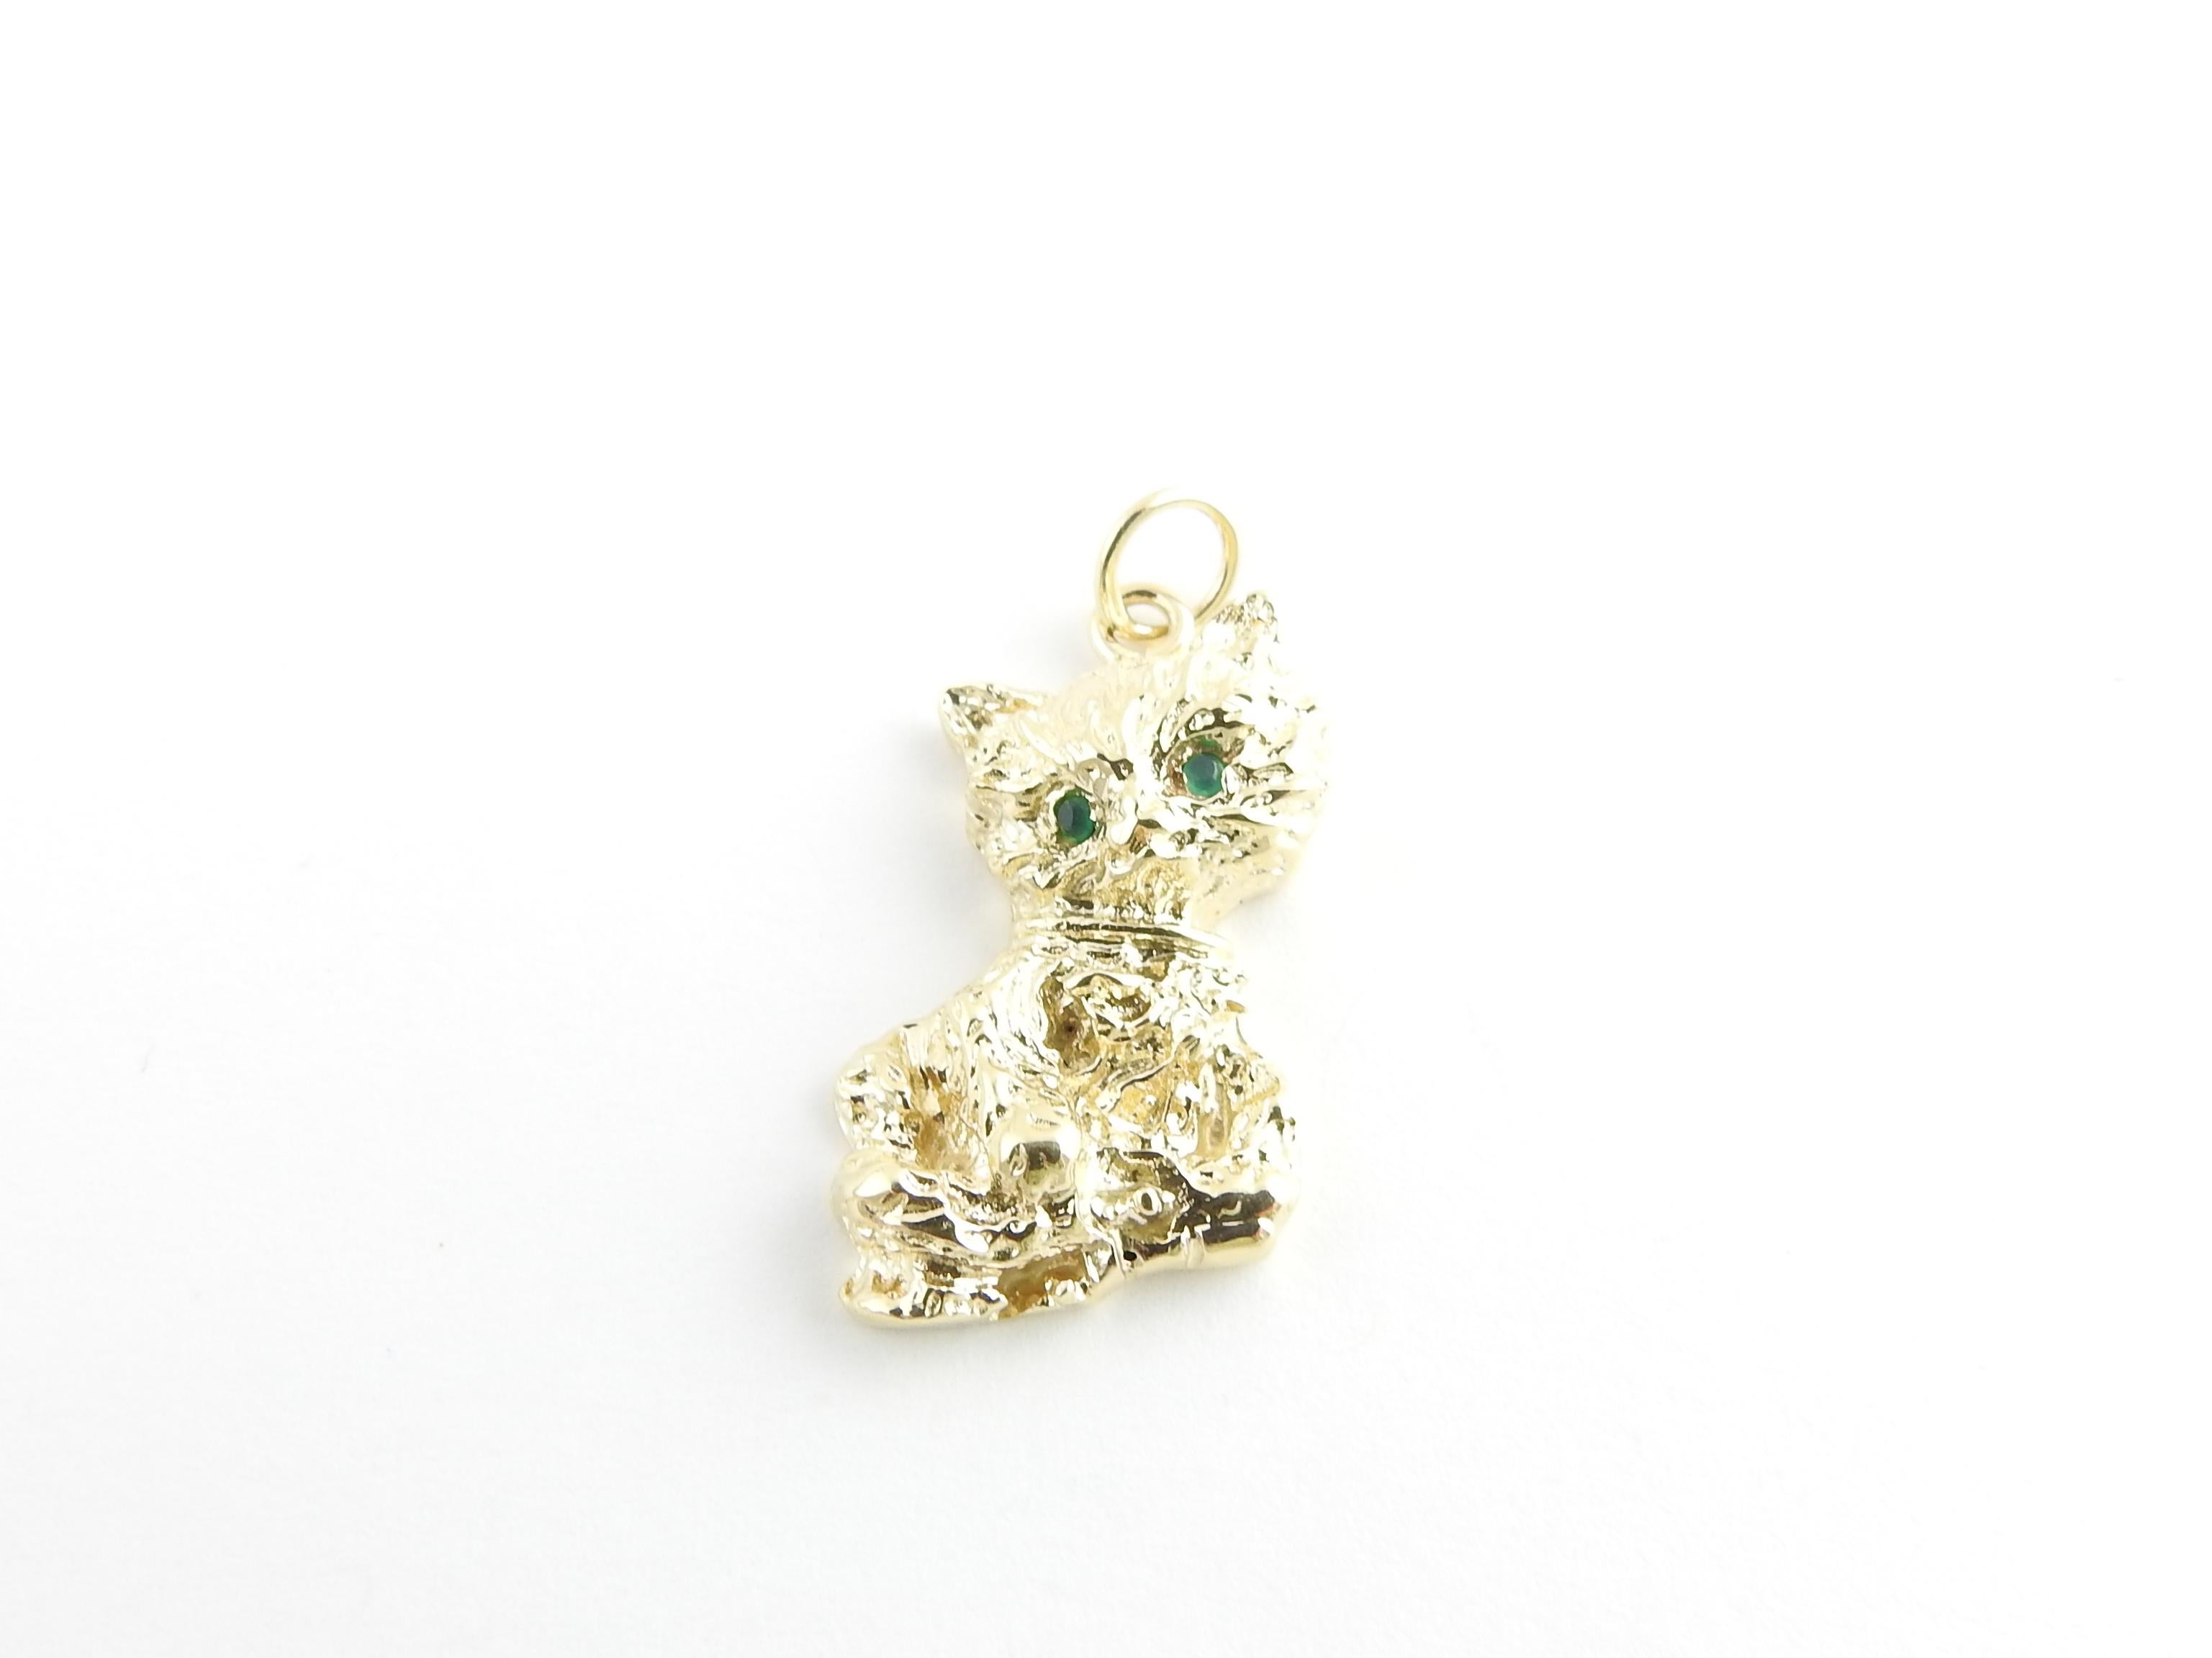 Vintage 14 Karat Yellow Gold and Emerald Cat Charm / Pendant

This adorable kitty is crafted in beautifully detailed 14K yellow gold and accented with two emerald eyes.

Size: 22 mm x 15 mm (actual charm)

Weight: 3.4 dwt. / 5.4 gr.

Acid tested for